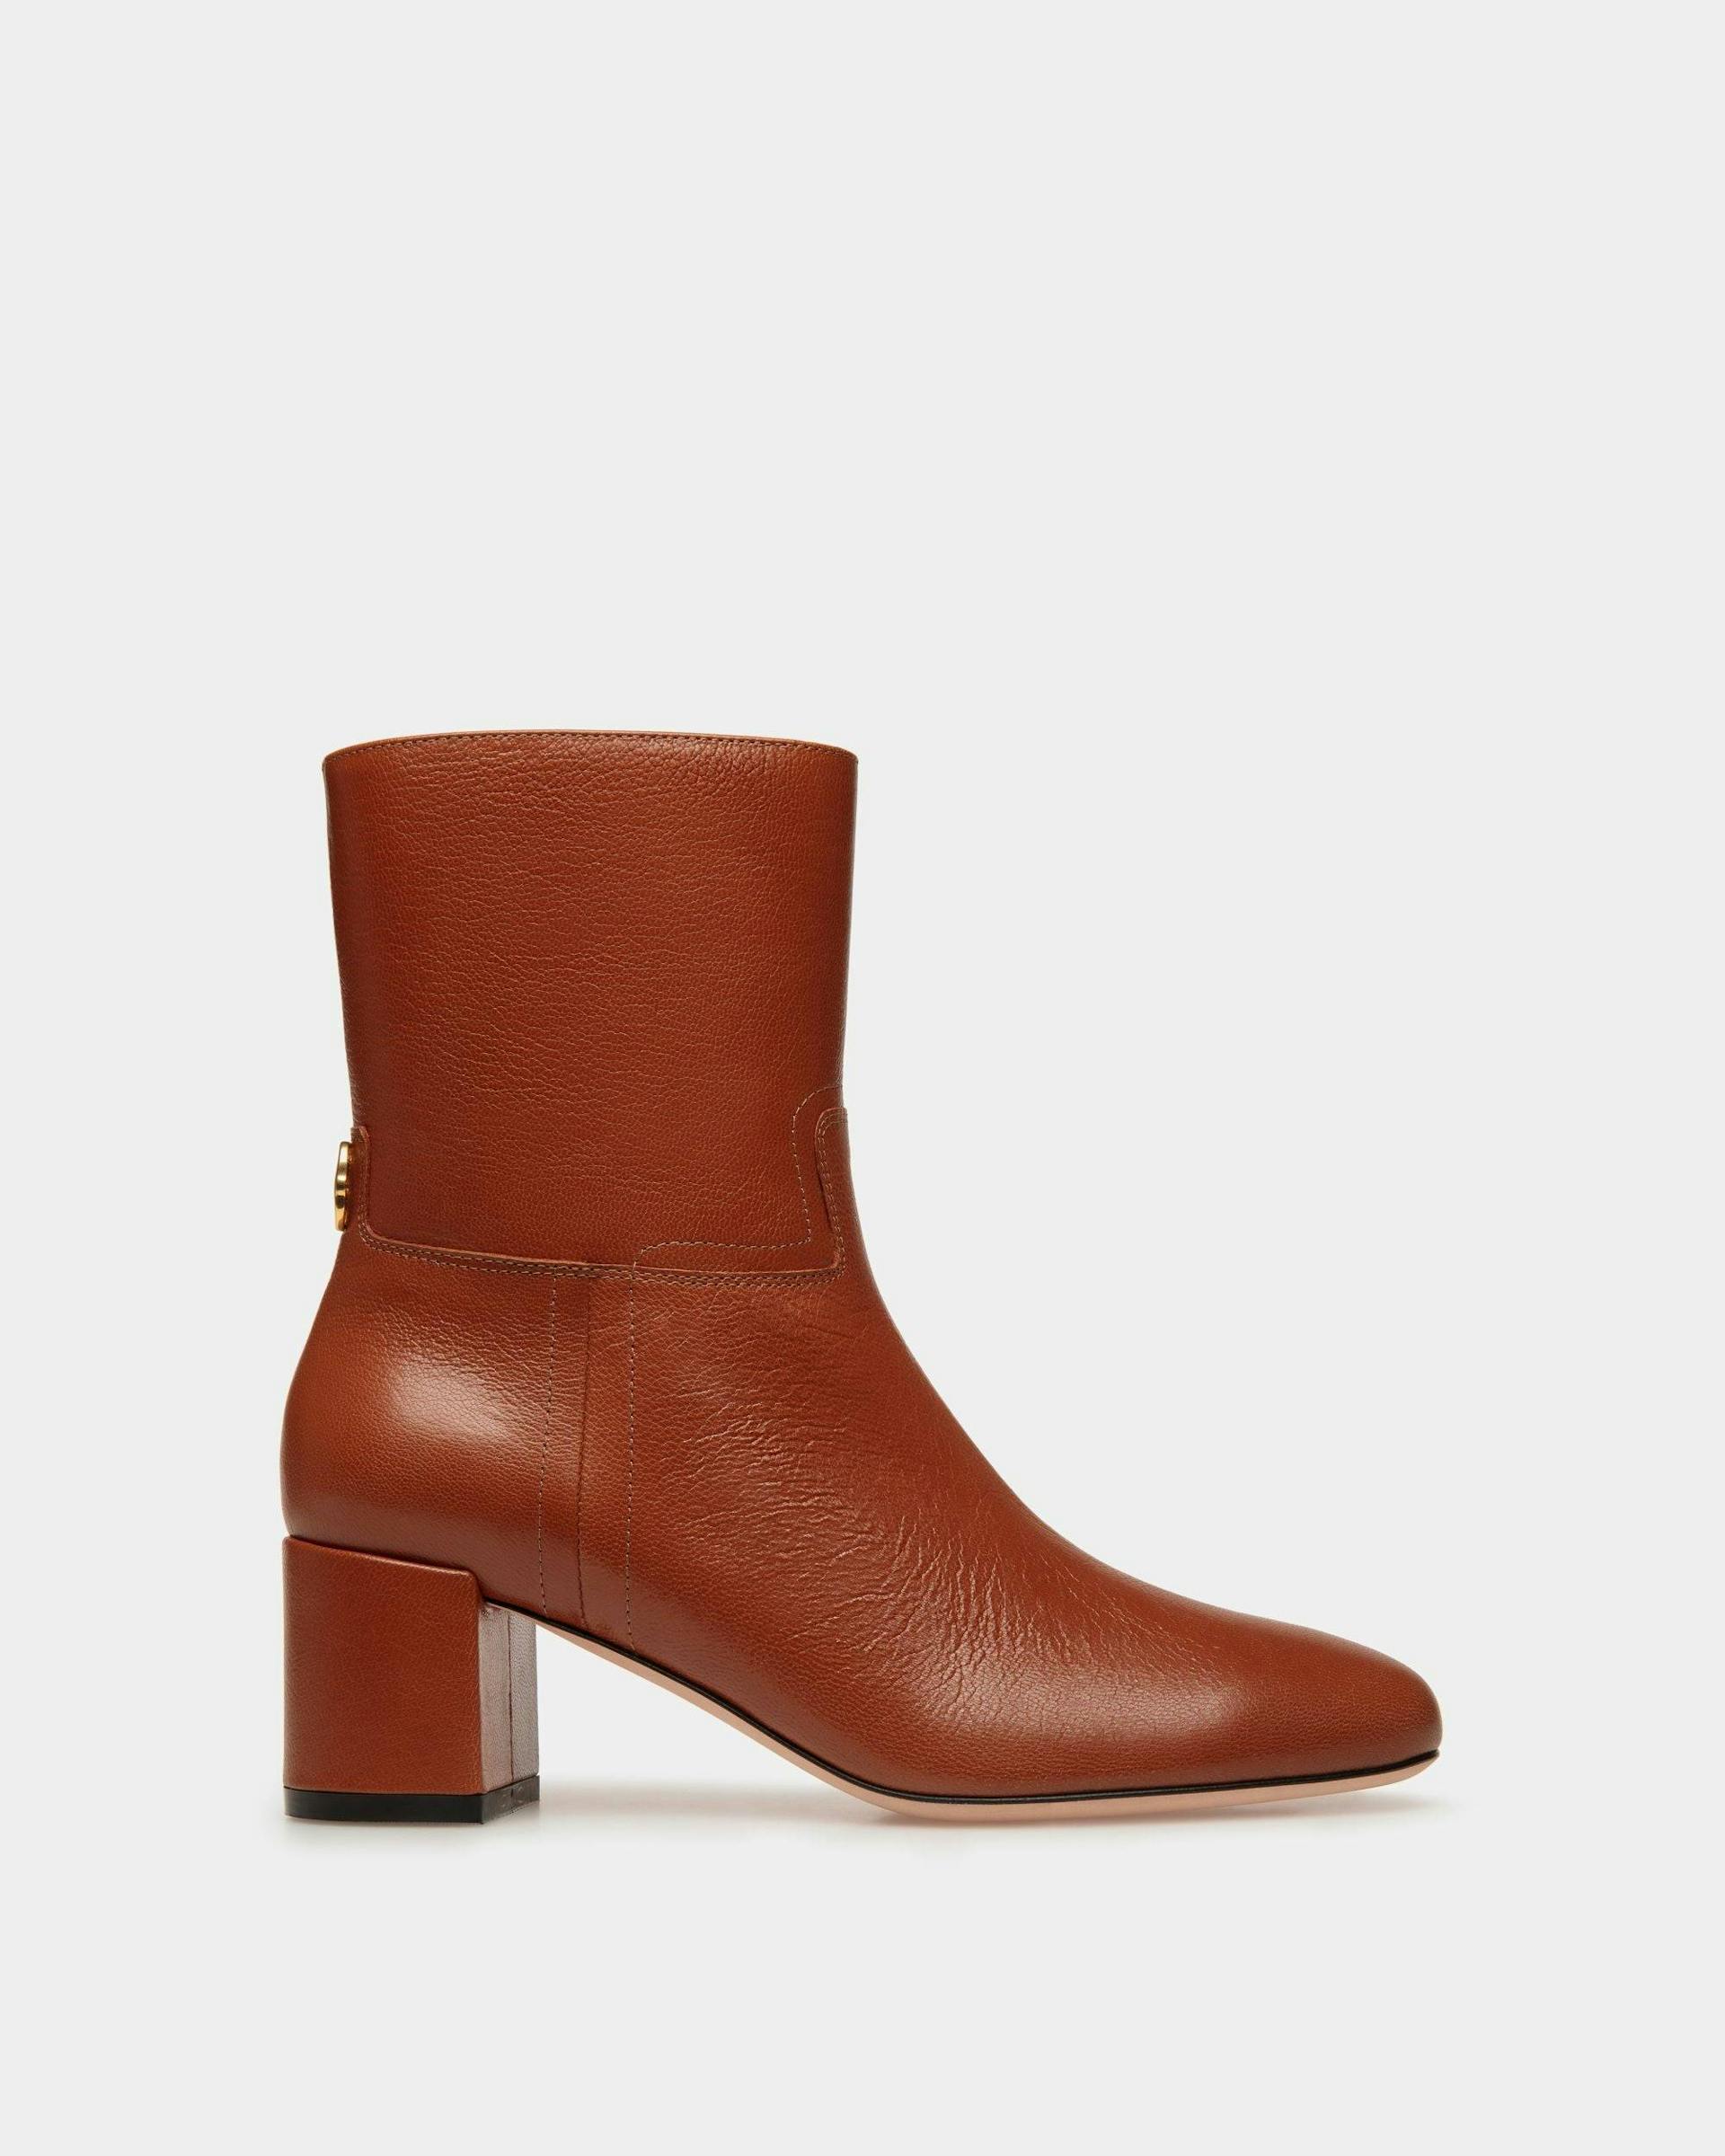 Daily Emblem Booties In Brown Leather - Women's - Bally - 01